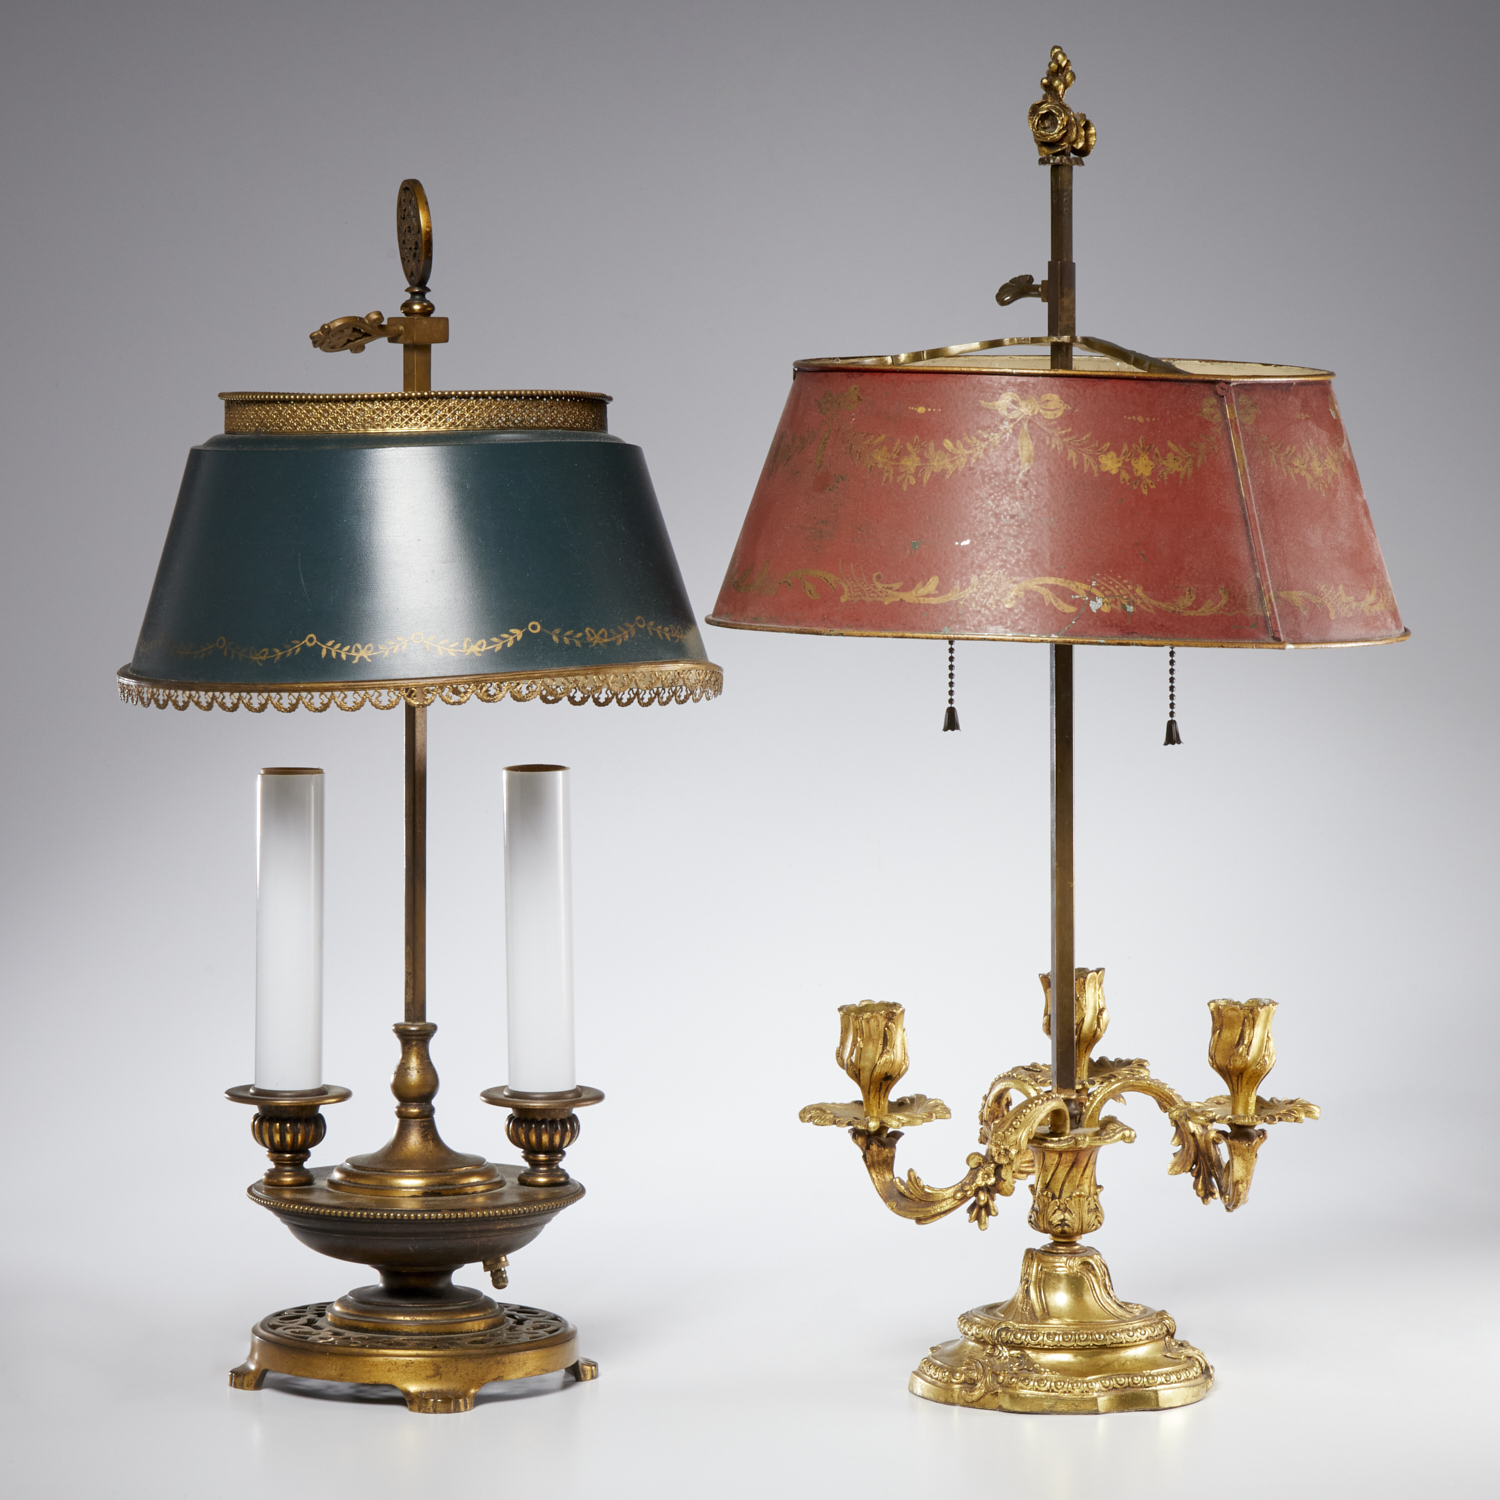  2 BRONZE BOUILLOTTE LAMPS WITH 30bd76